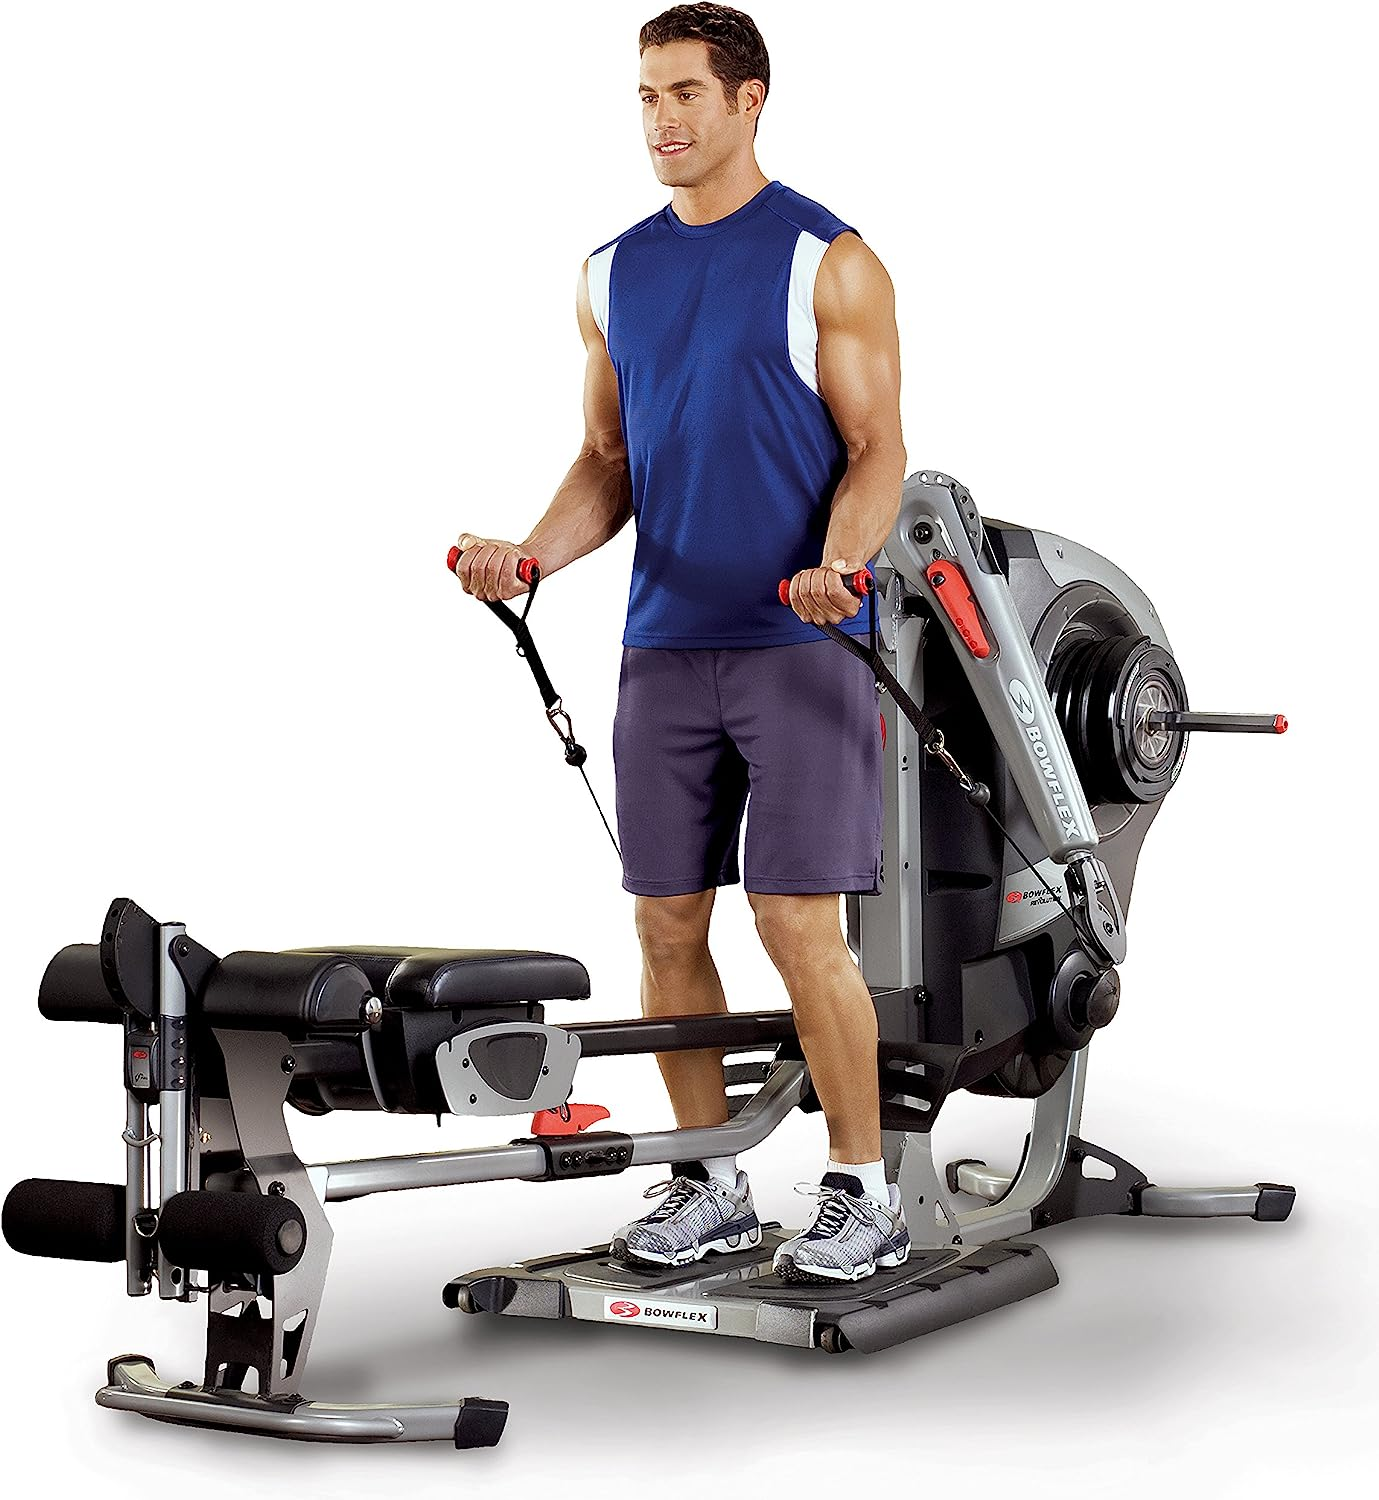 A Bowflex home gym machine with a variety of attachments and accessories